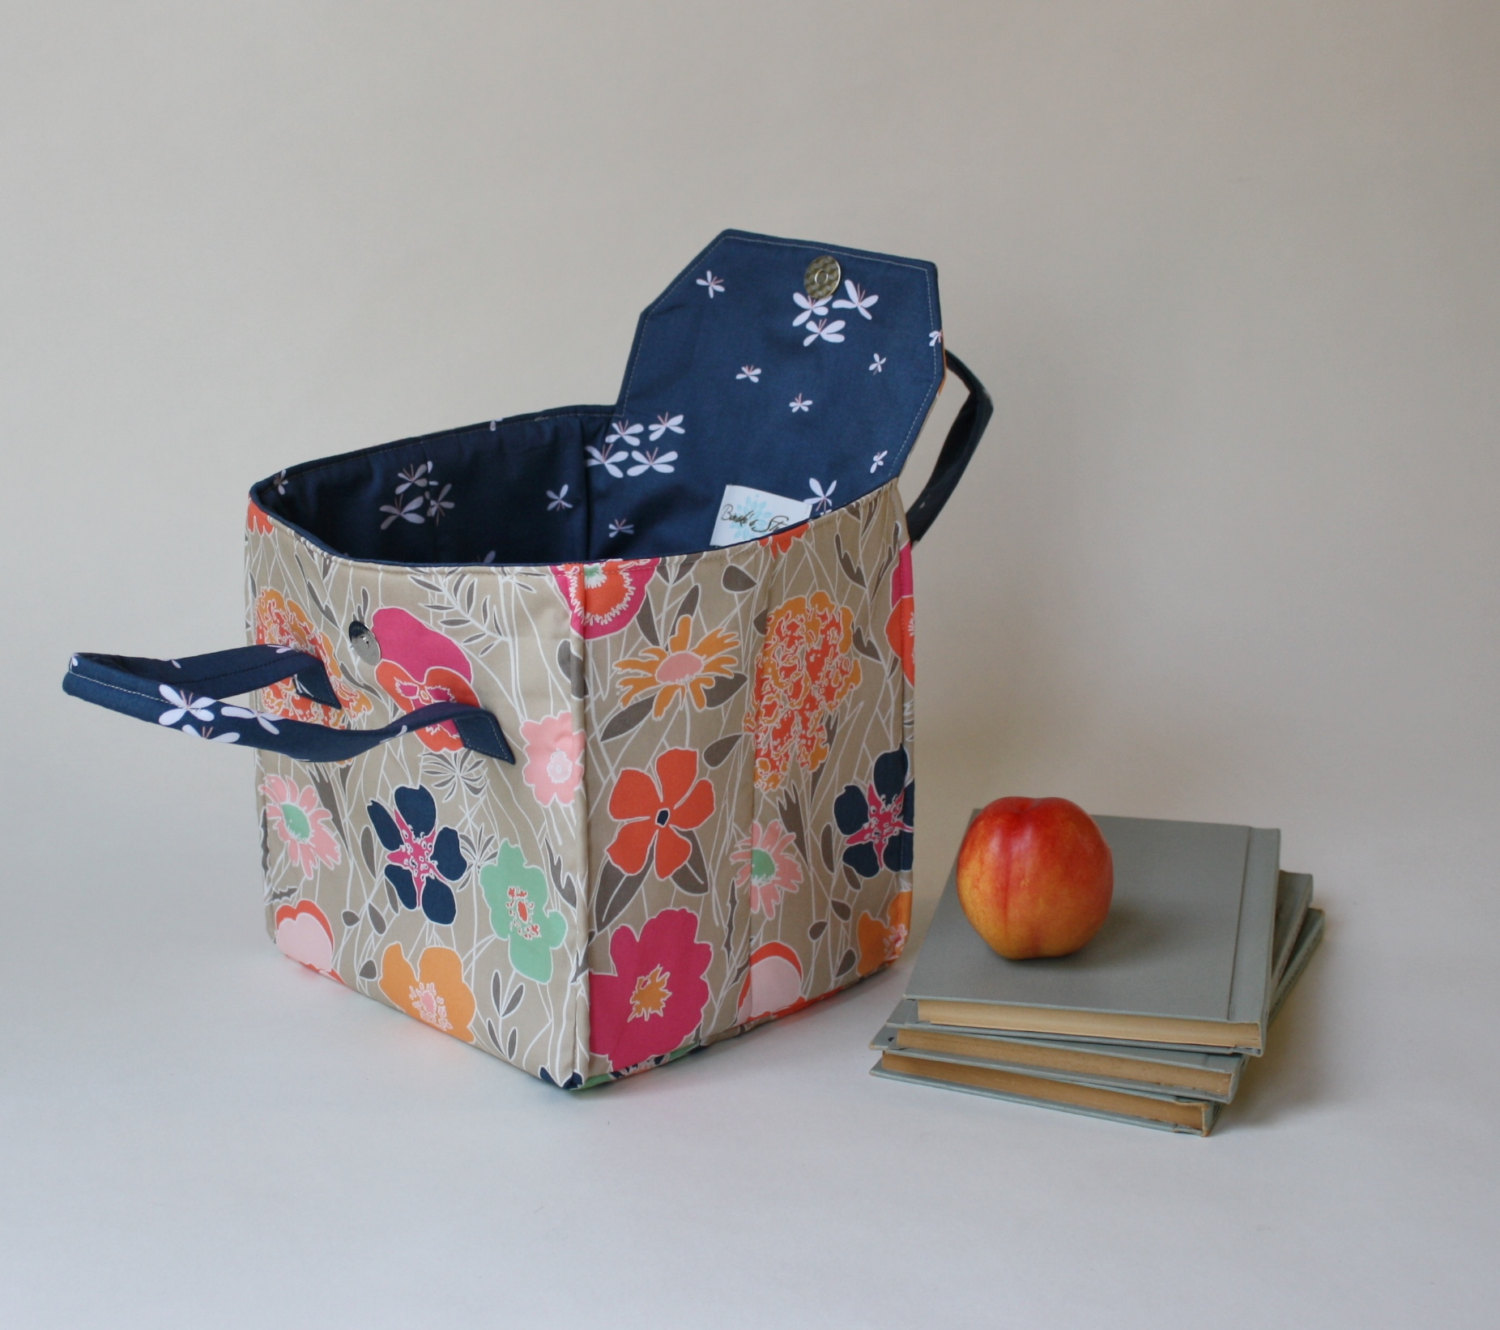 Insulated Lunch Bag in Floral and Firefies - Insulated Lunch Tote - Bento Box Carrier - Ready to Ship